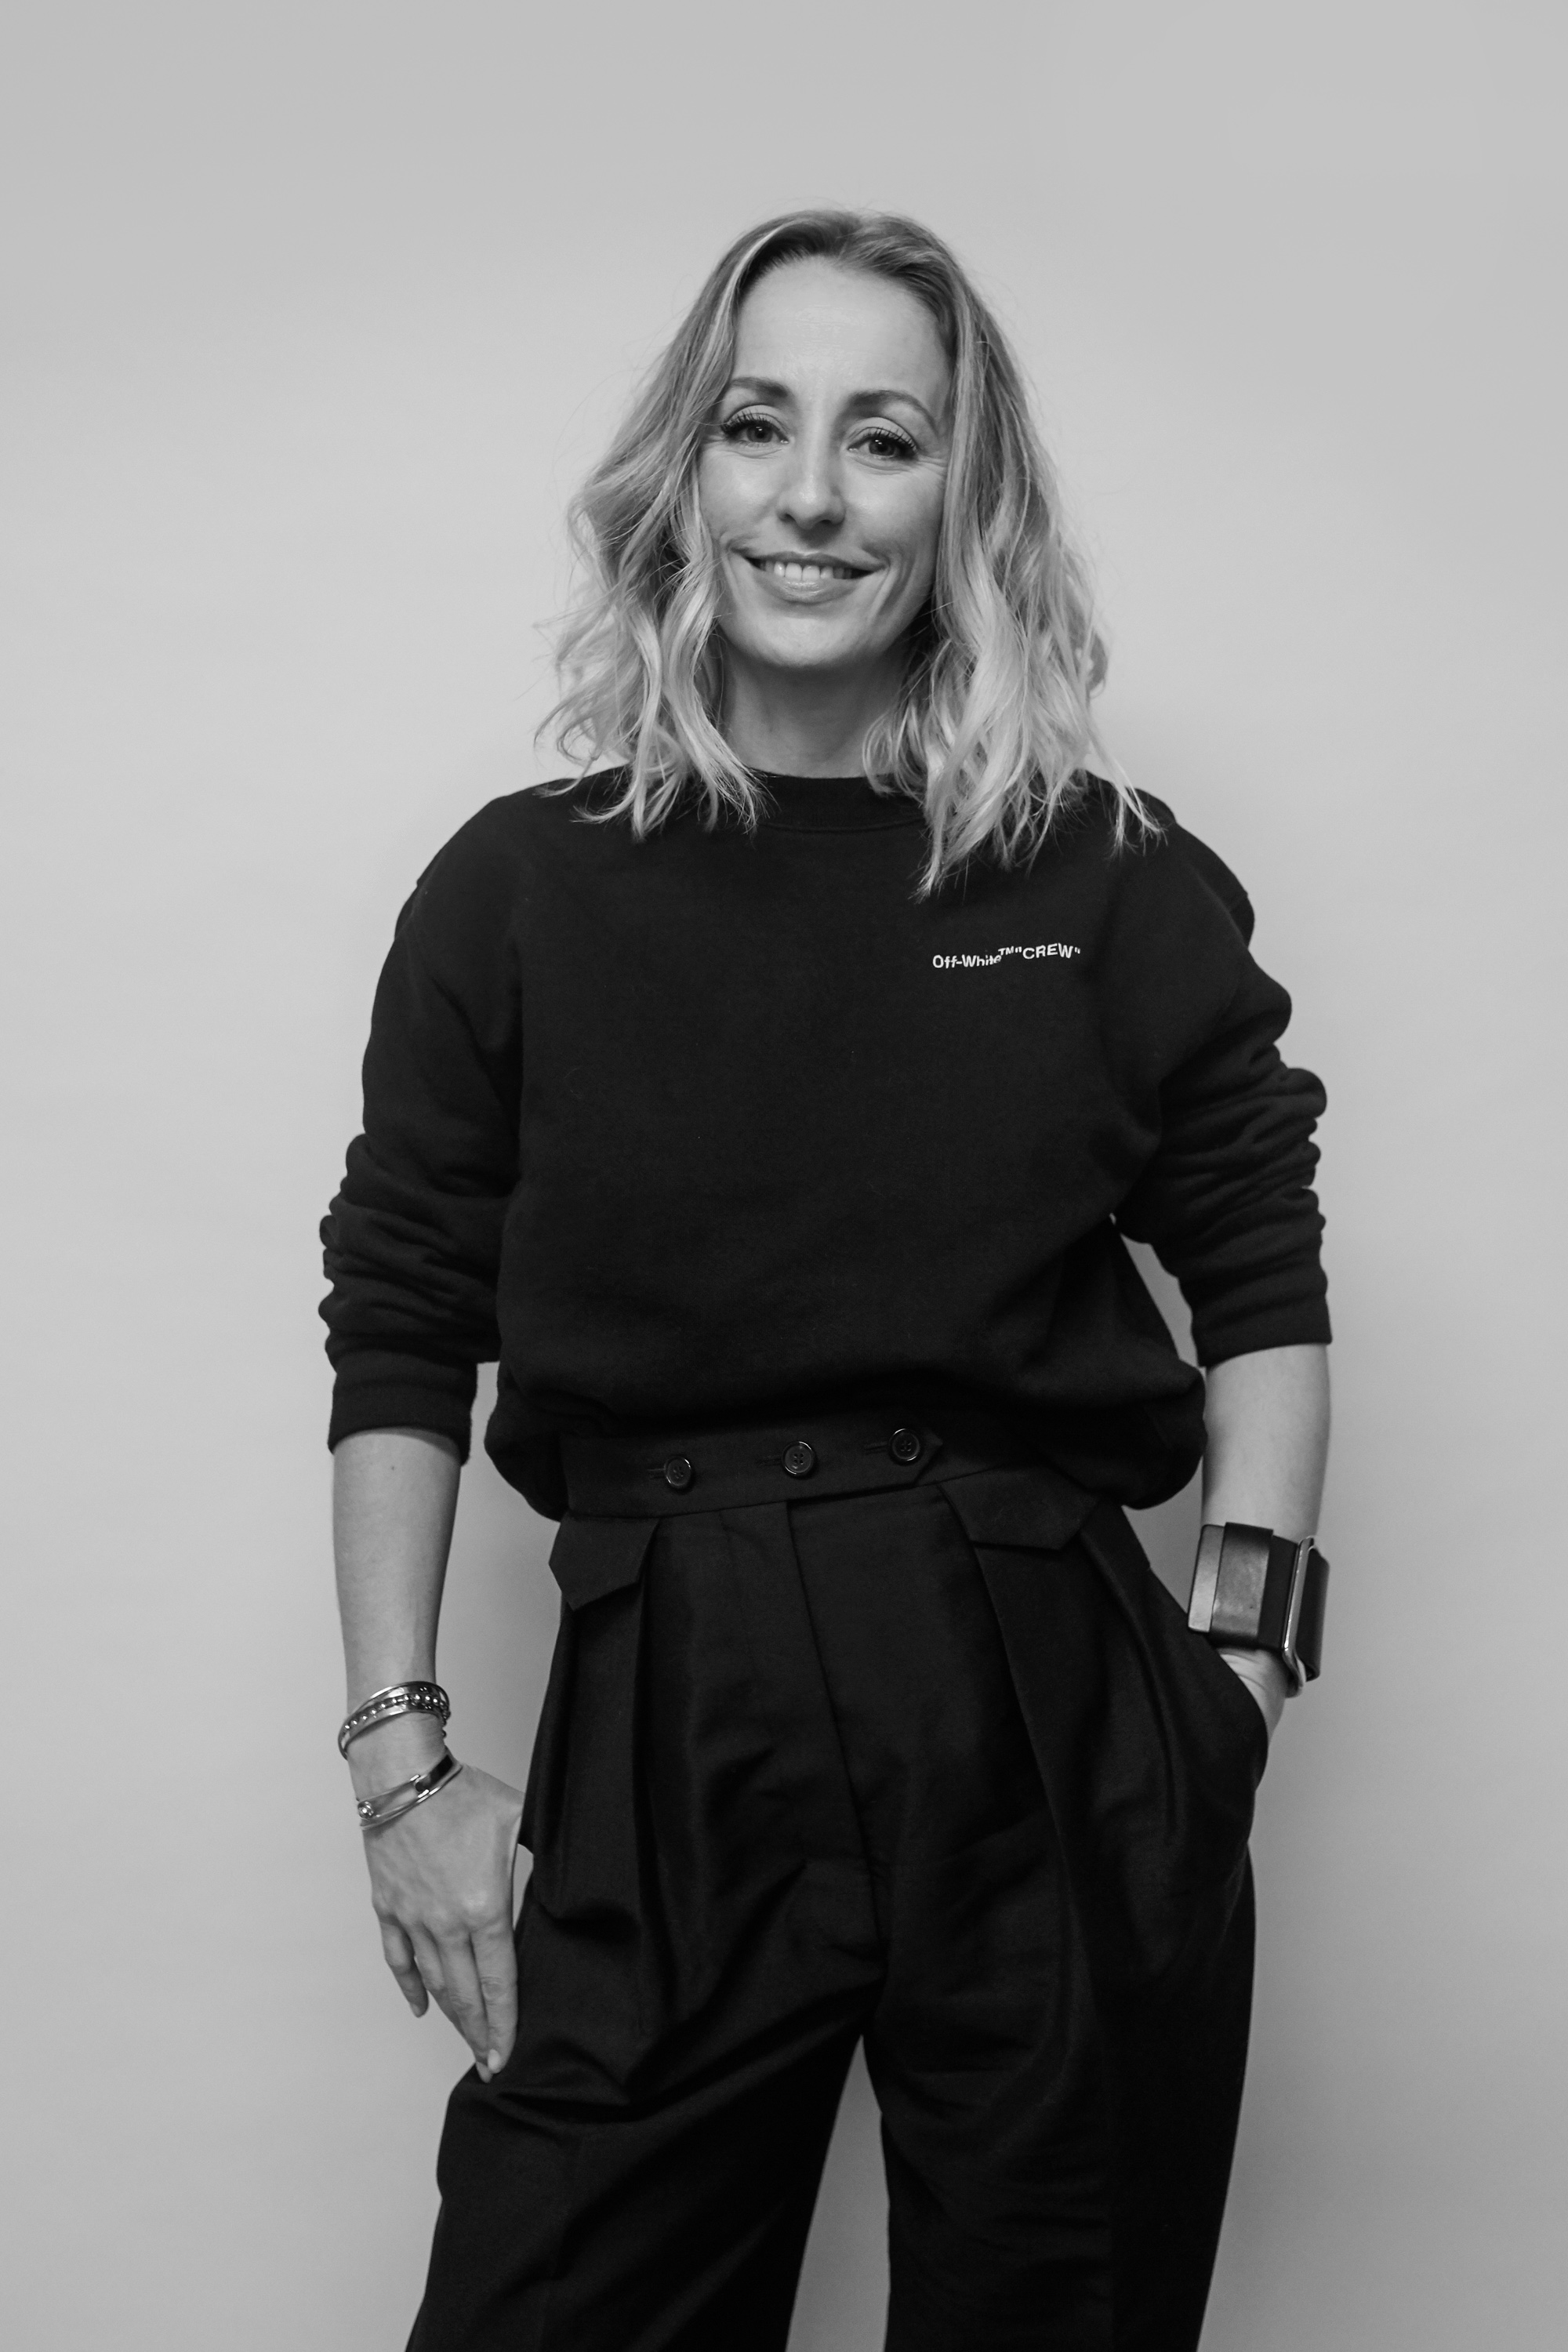 Vestiaire Collective founder Fanny Moizant on raising the bar for resale -  Retail in Asia